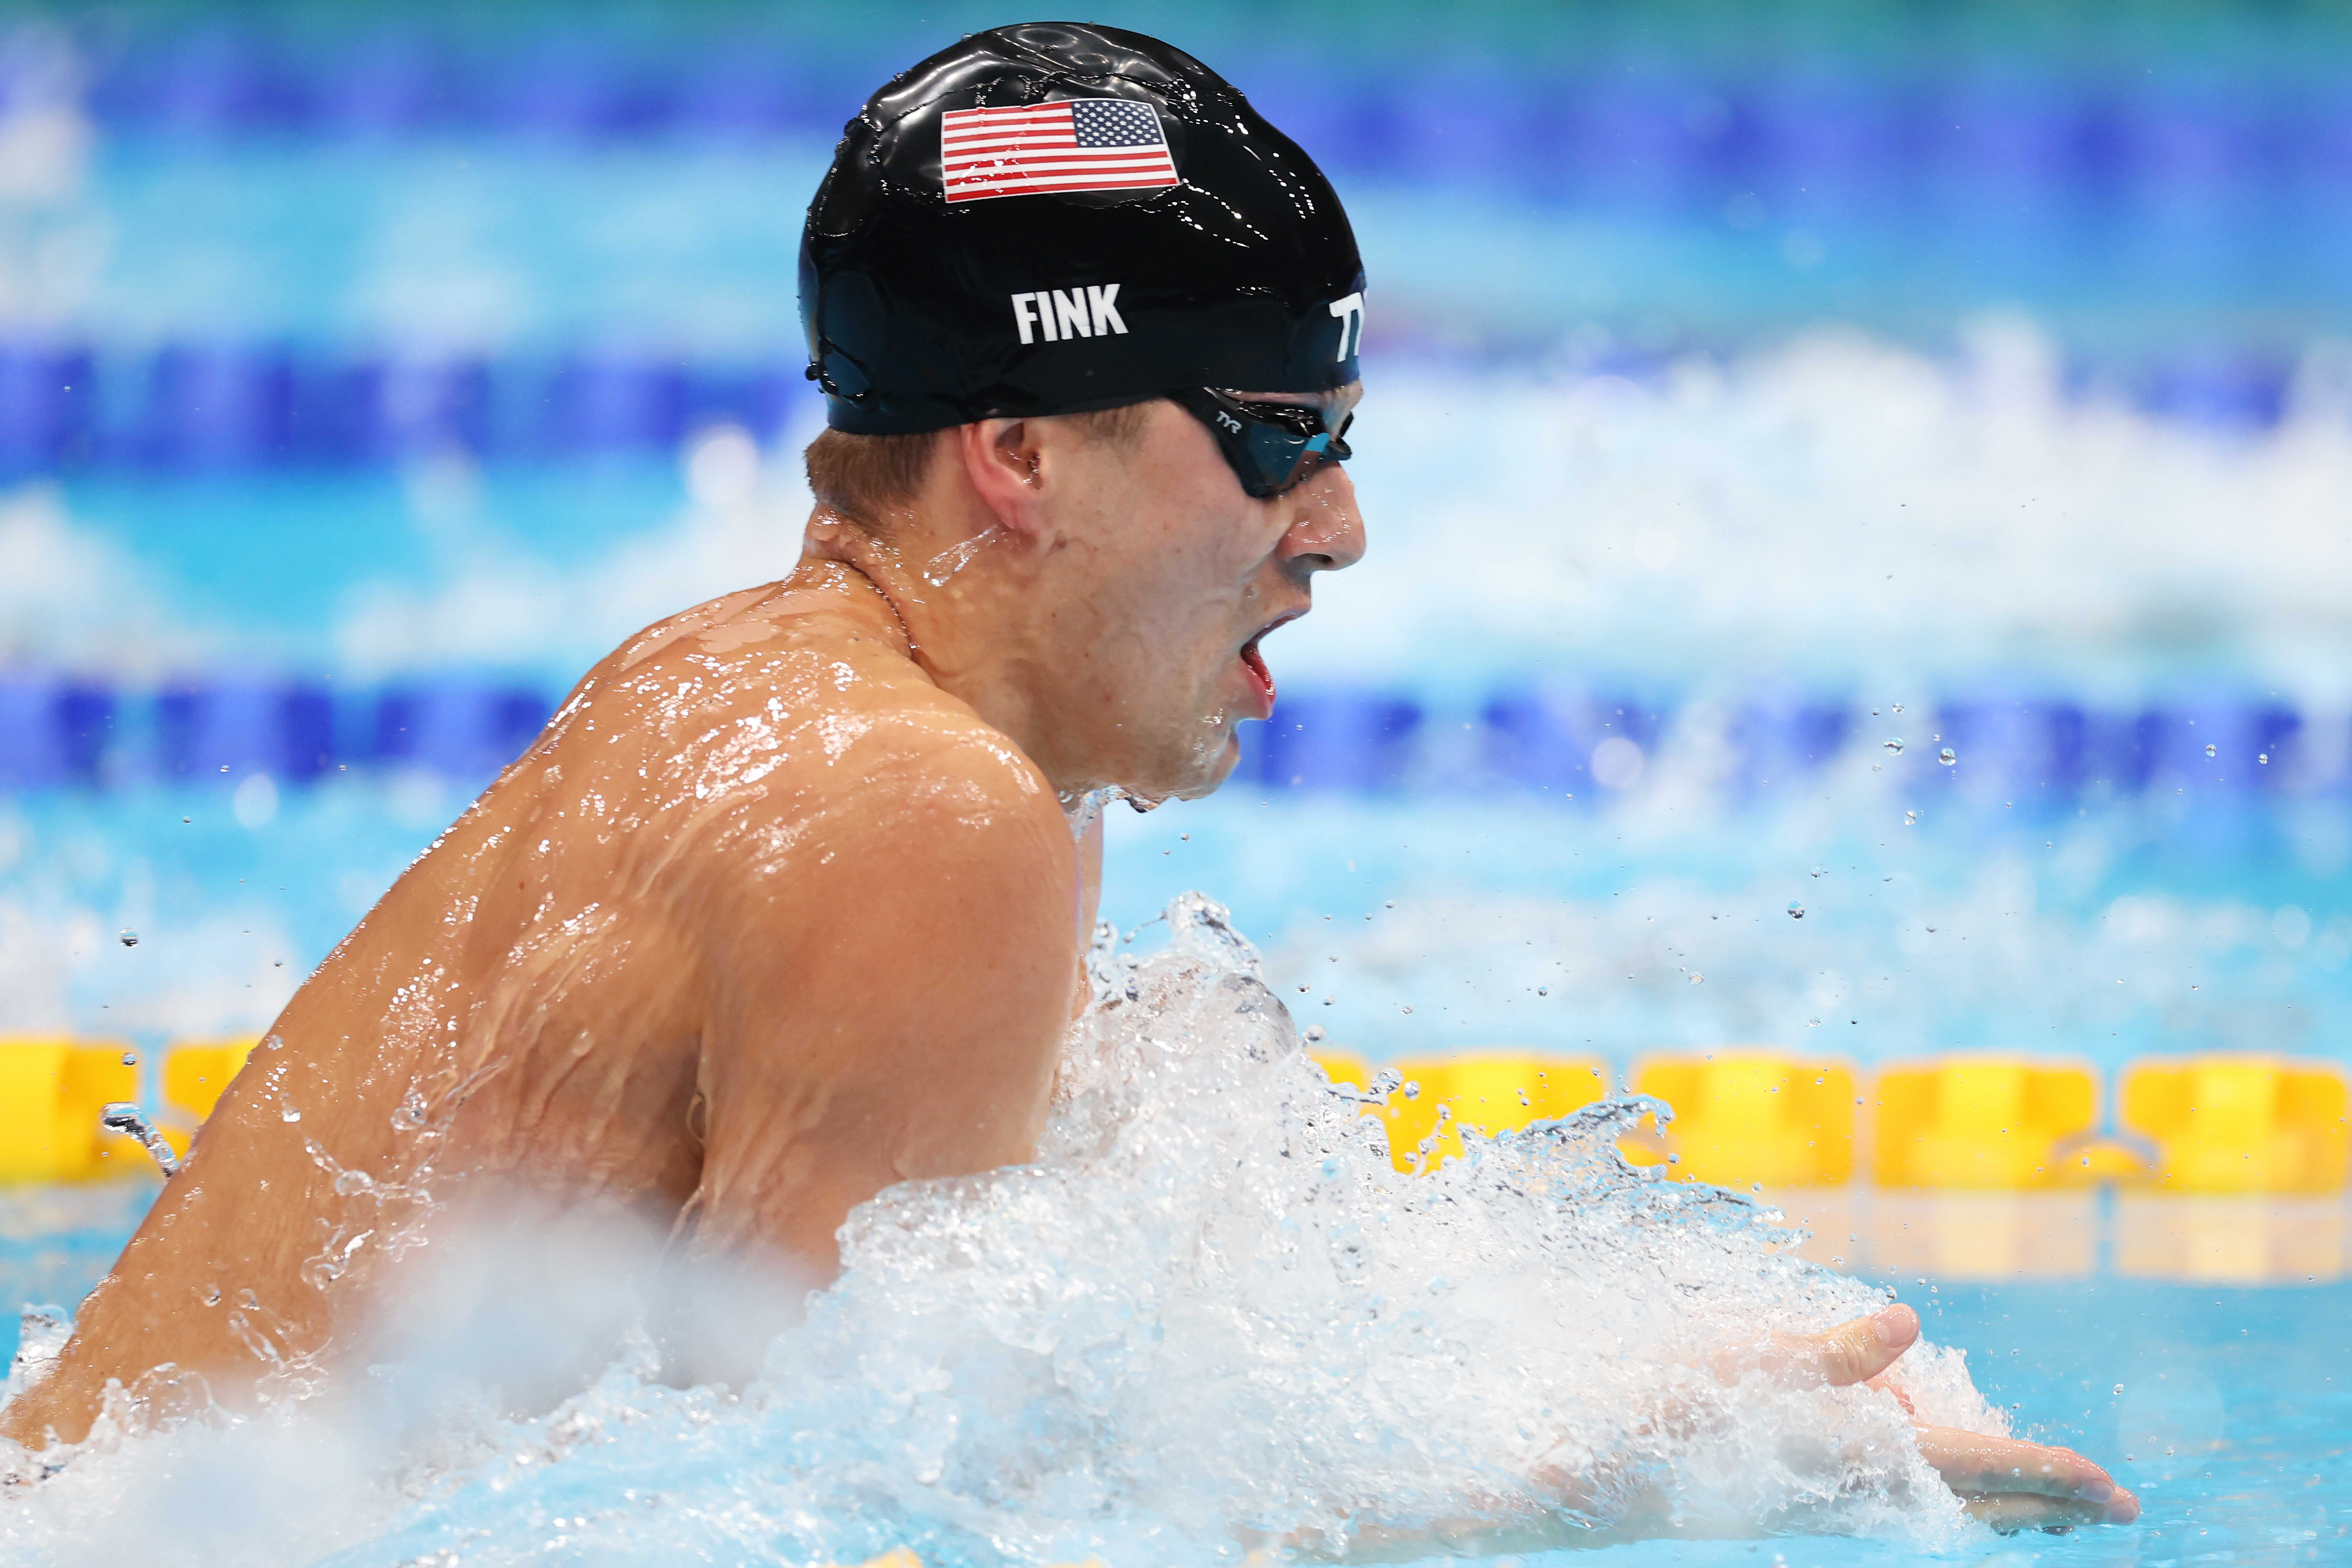 How an Olympic swimmer with a 9-to-5 engineering job schedules his day